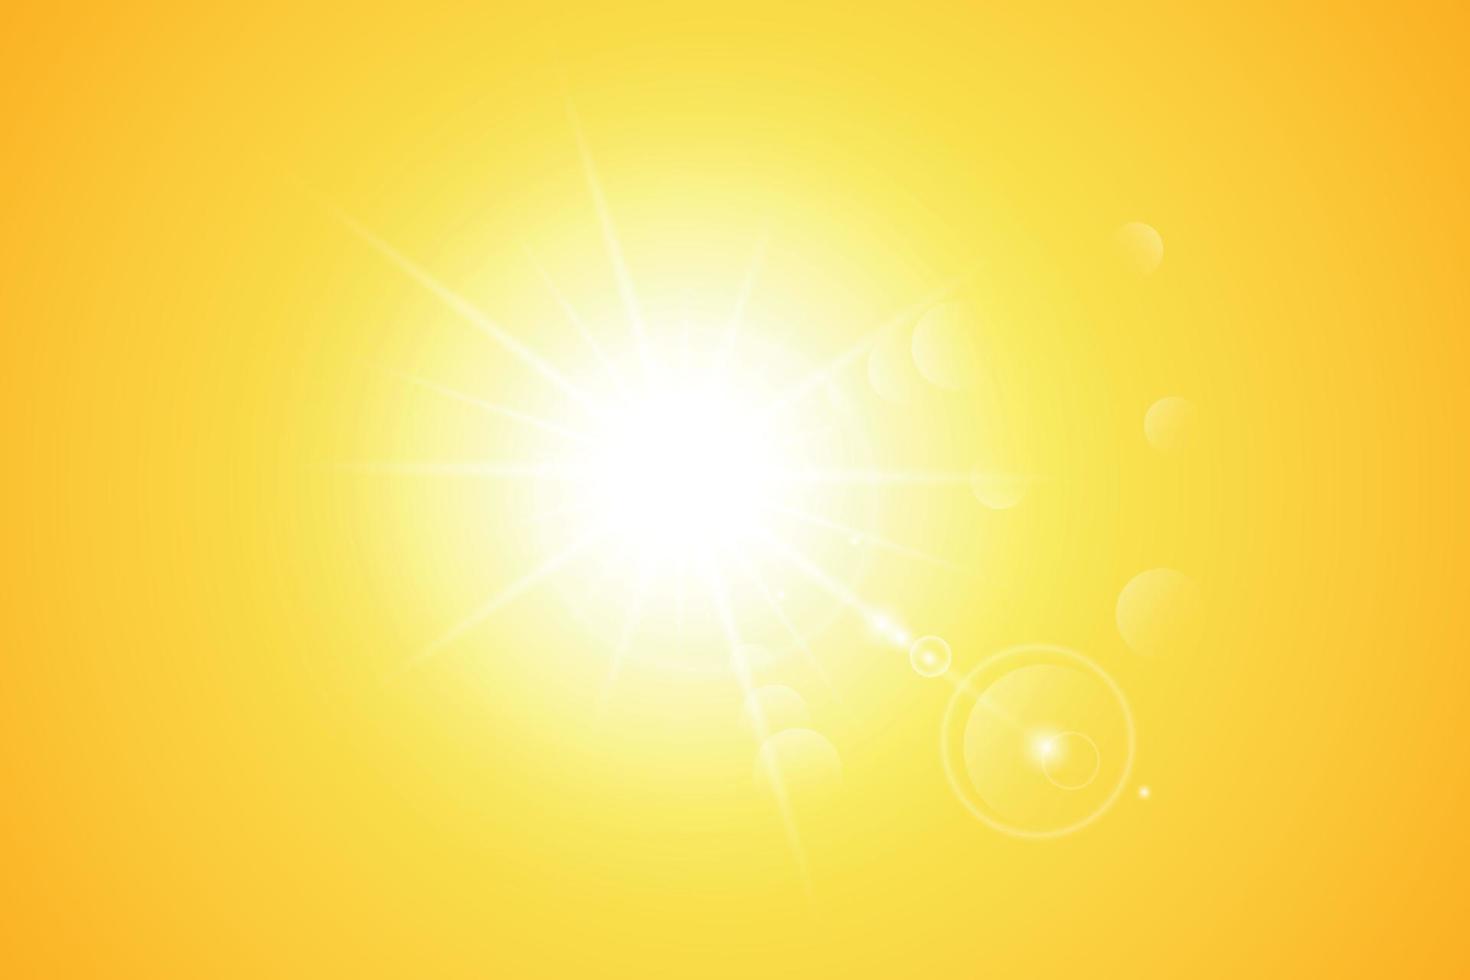 Bright yellow background with lens flare vector